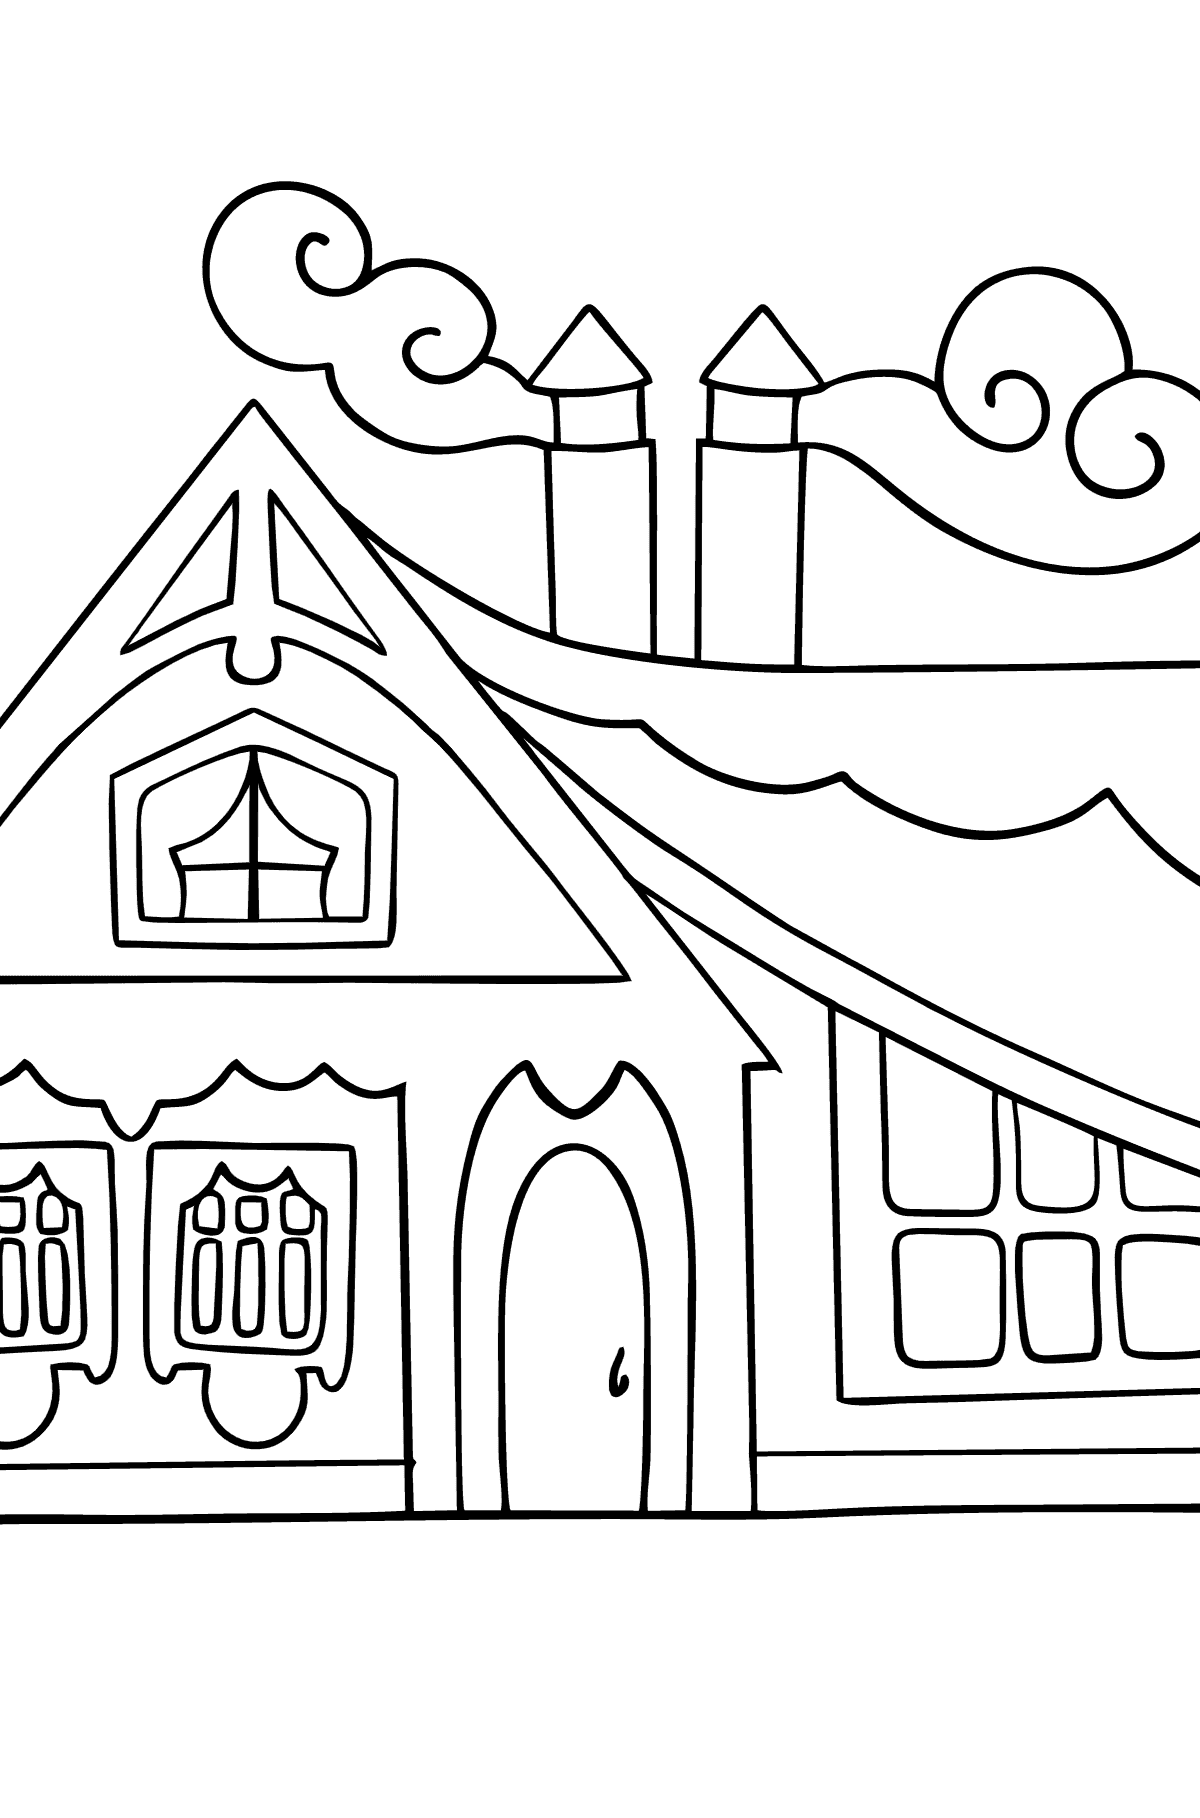 Coloring Page - A Tiny House - Coloring Pages for Children